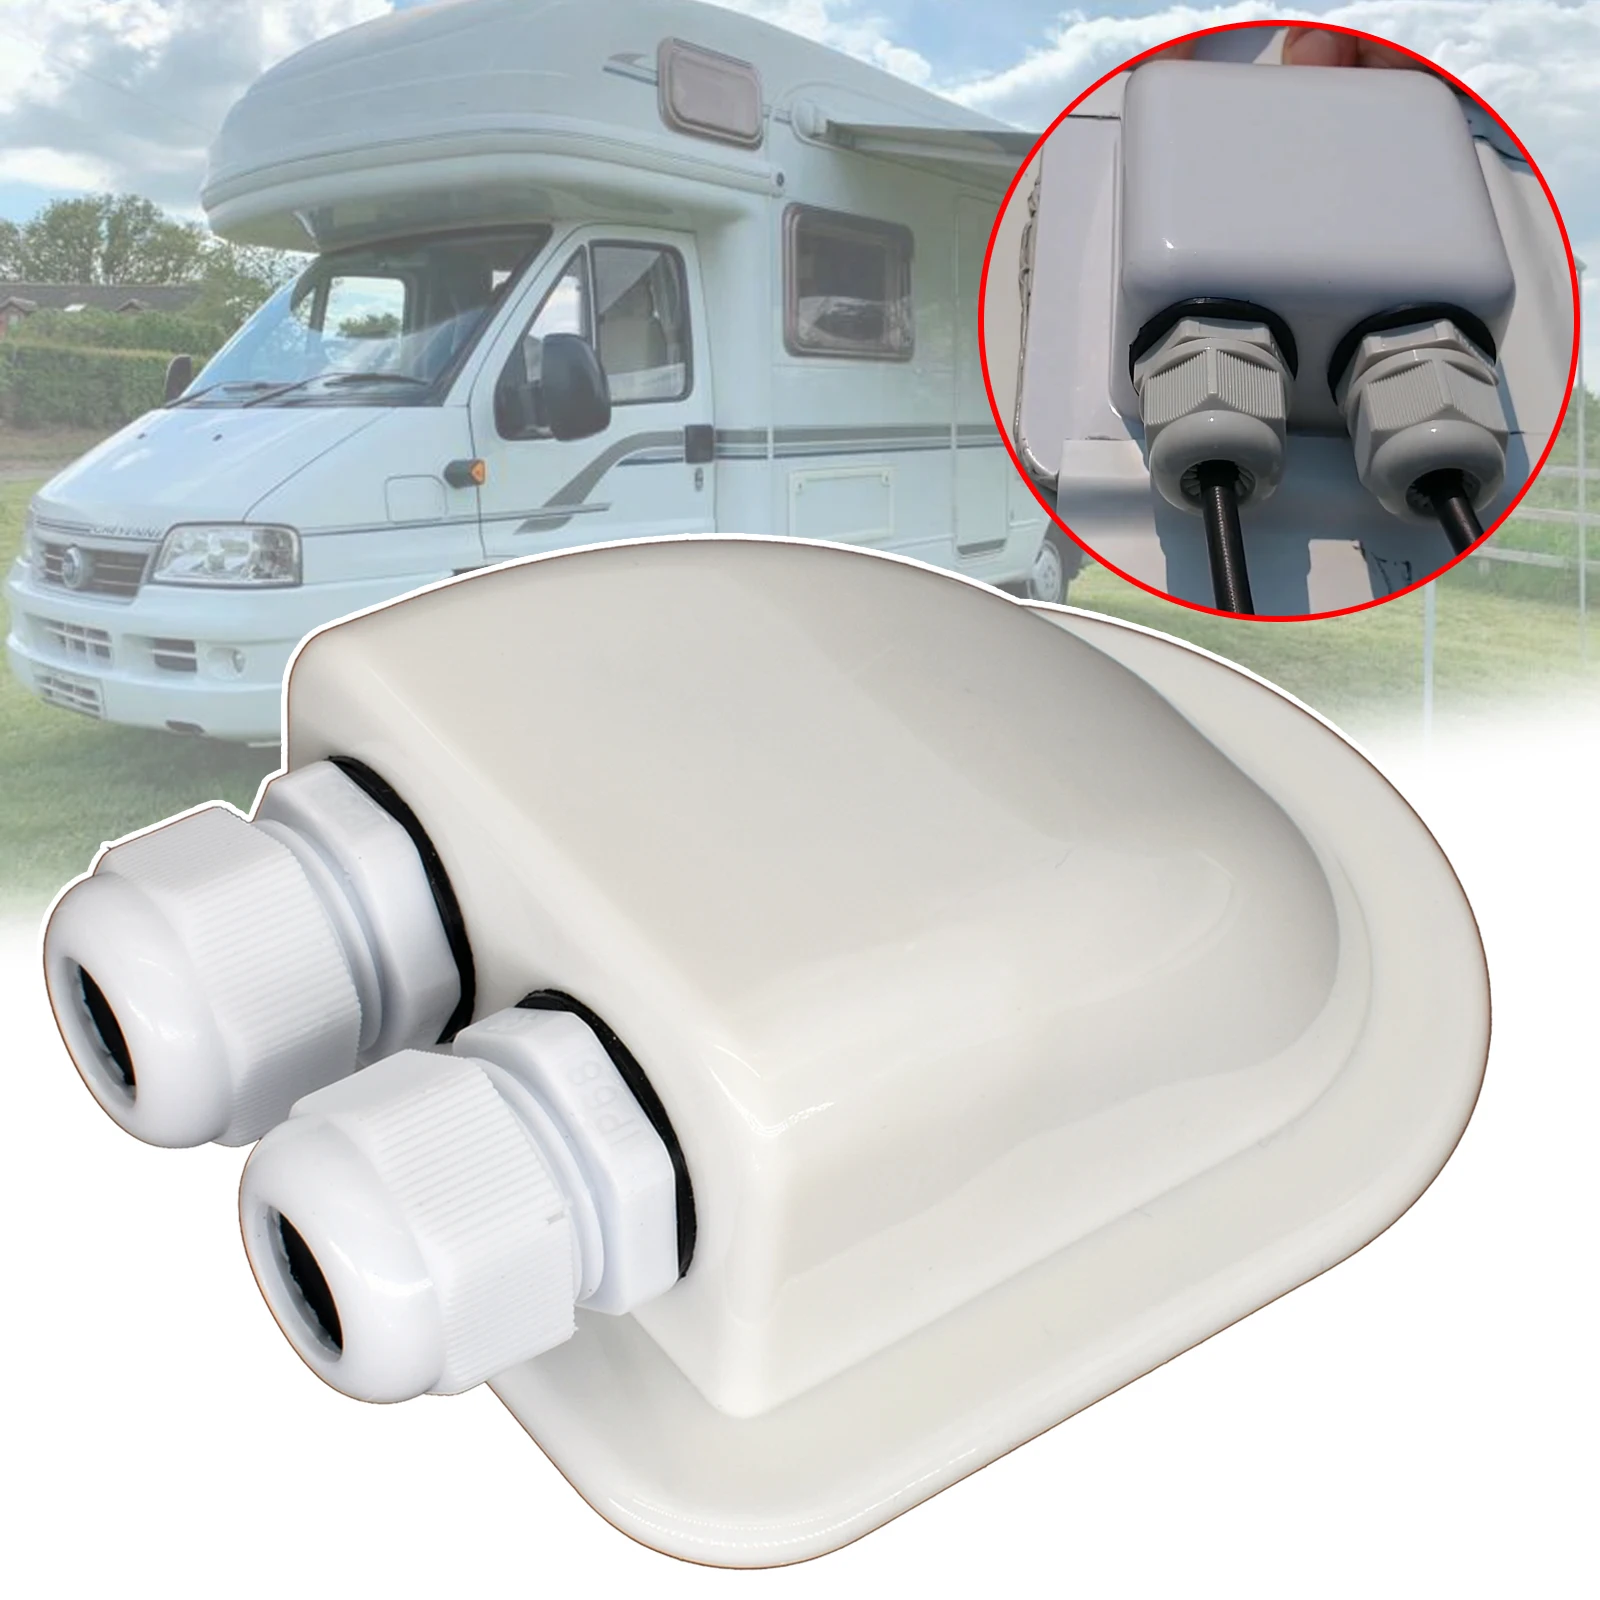 RV Roof Top Junction Box For Solar Panel Wiring Double Hole Cable Entry Gland IP68 Waterproof For RV Yacht Boat Caravan Camper ip68 pressure transducer cable pressure transmitter water gas hydraulic sensor 0 1mpa 0 1 6mpa 0 2 5mpa 4 20ma dc24v g1 4